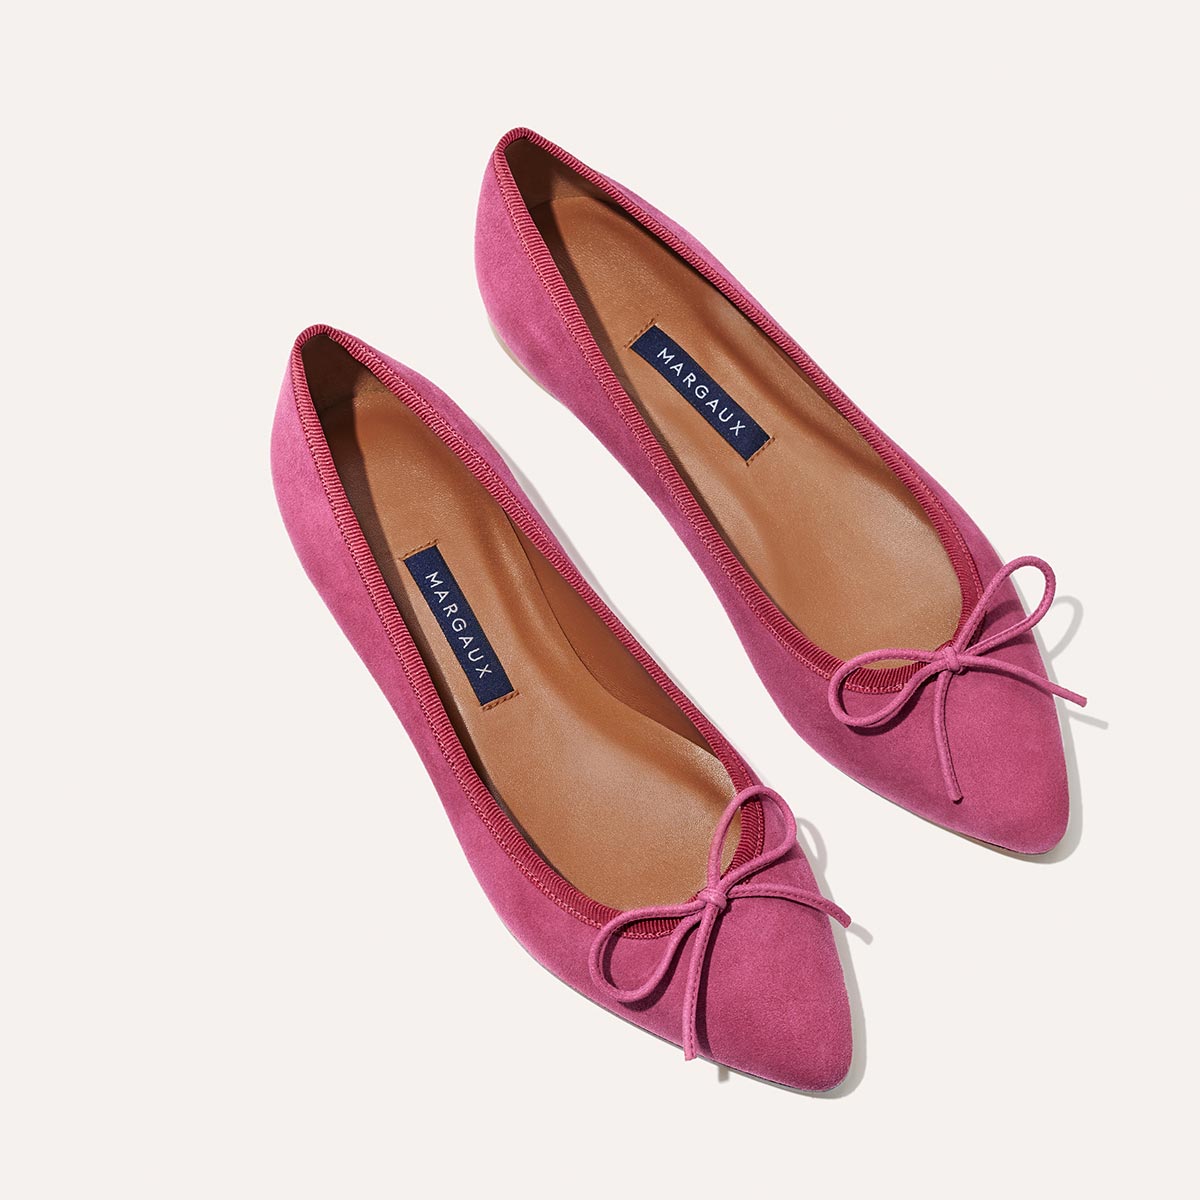 The Pointe - Peony Suede